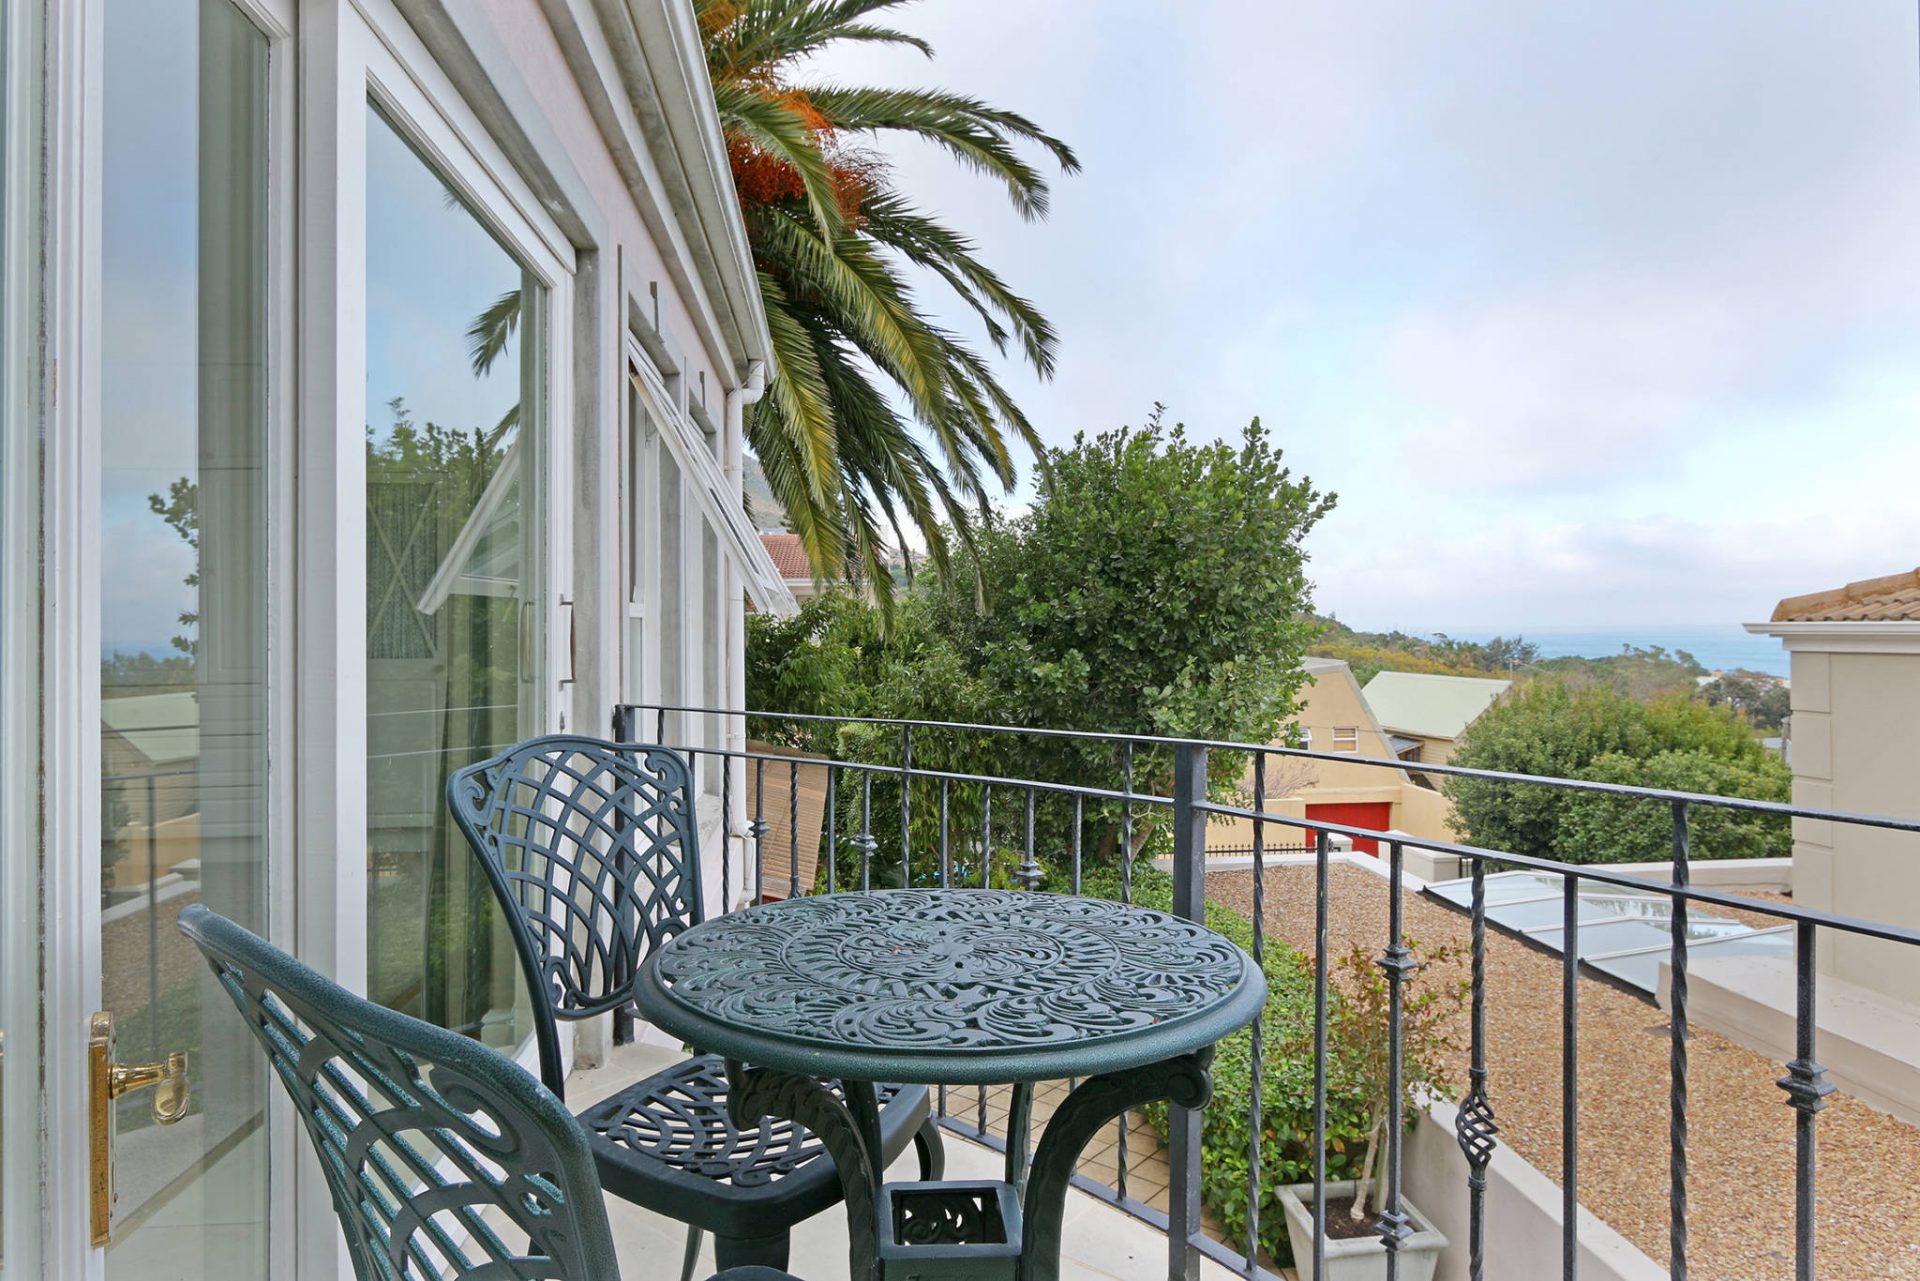 Photo 14 of King Street Villa accommodation in Hout Bay, Cape Town with 3 bedrooms and 2 bathrooms